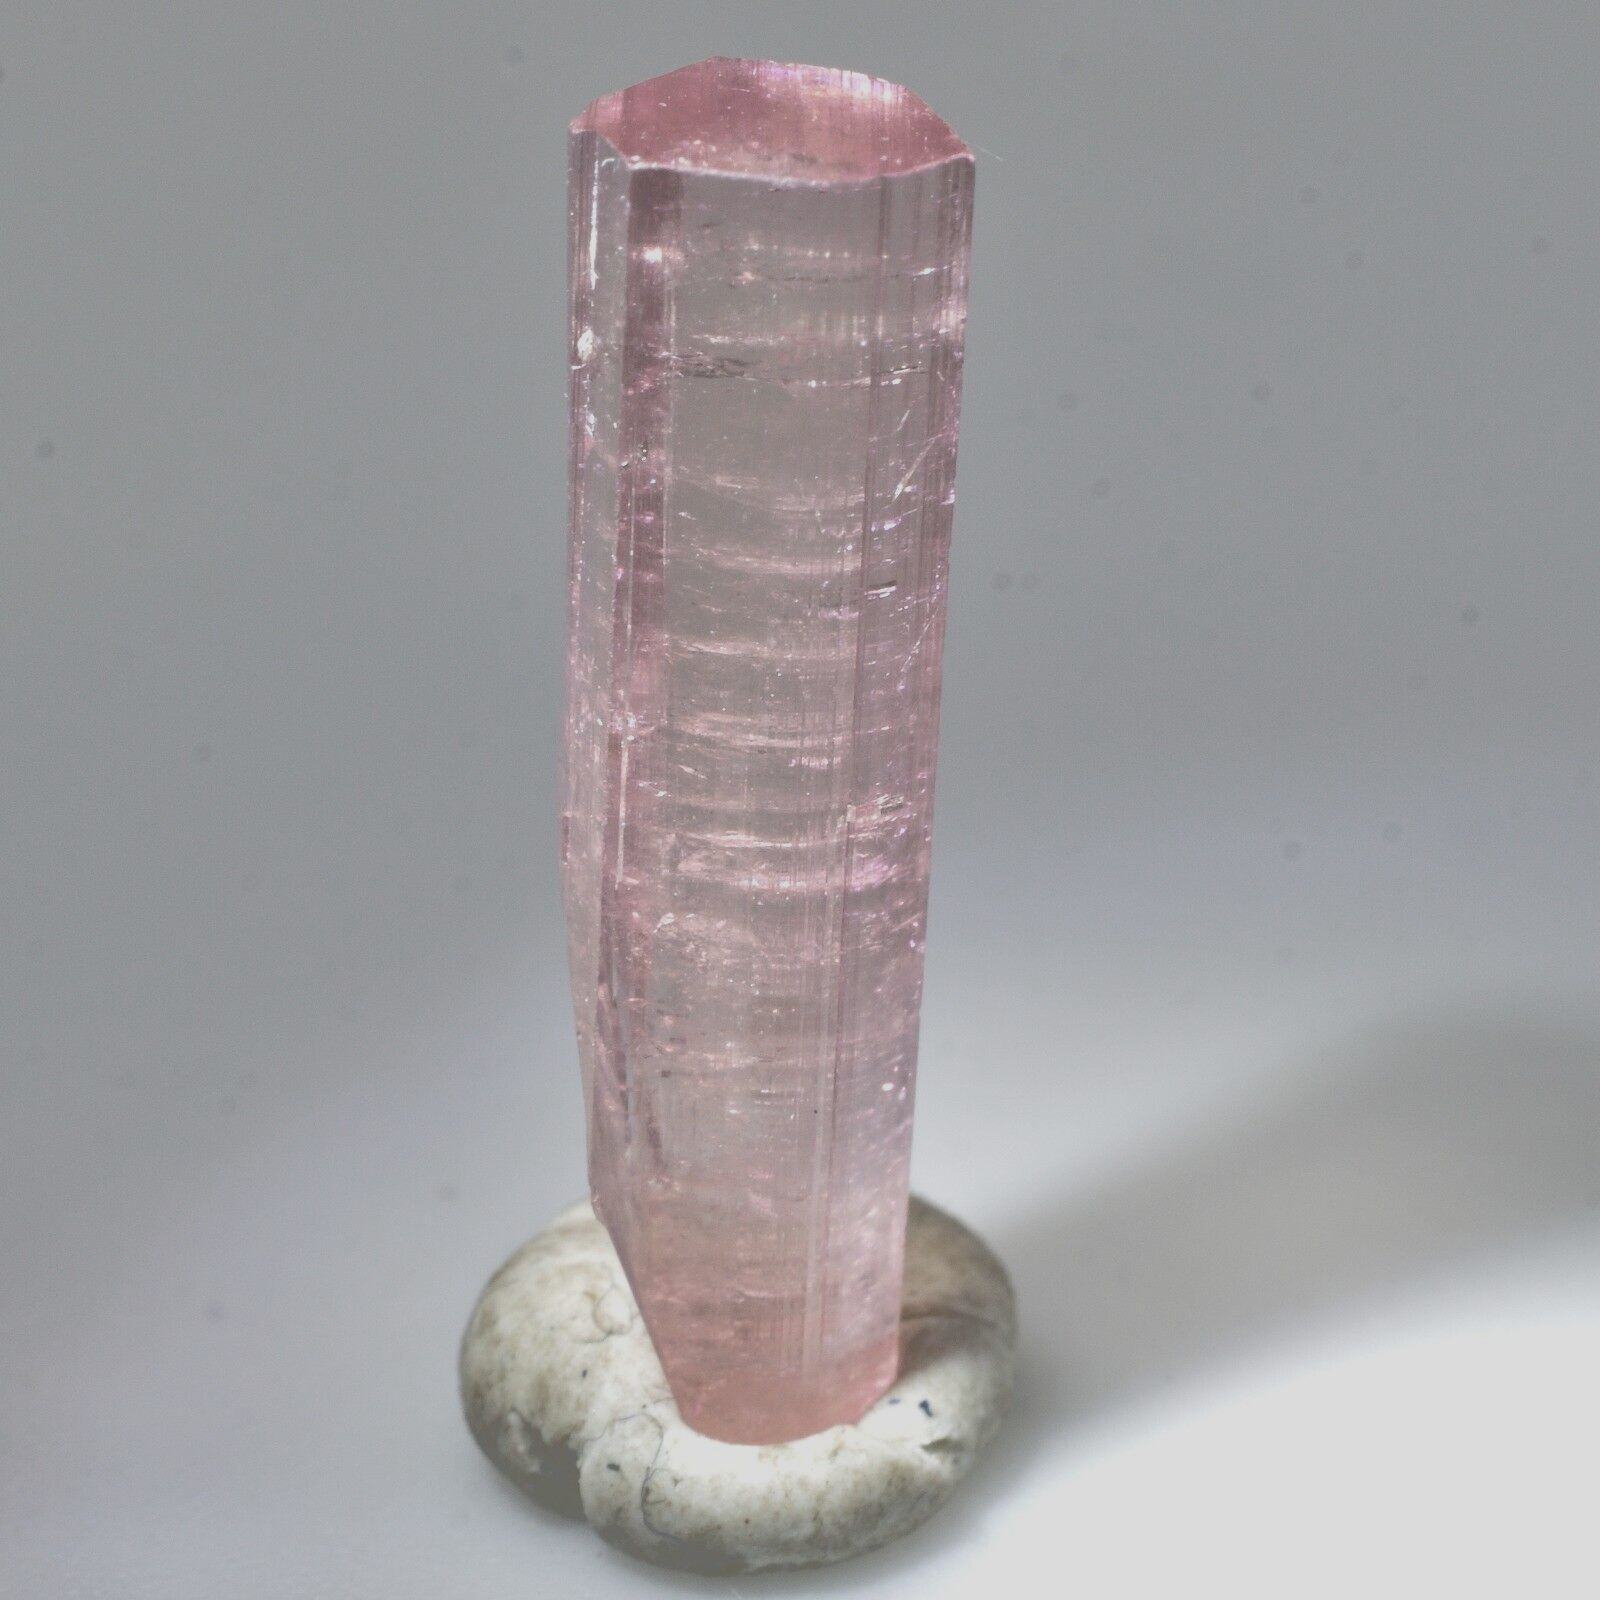 5 Carats Top Quality Pink Tourmaline Crystal from Paparok Mine Afghanistan